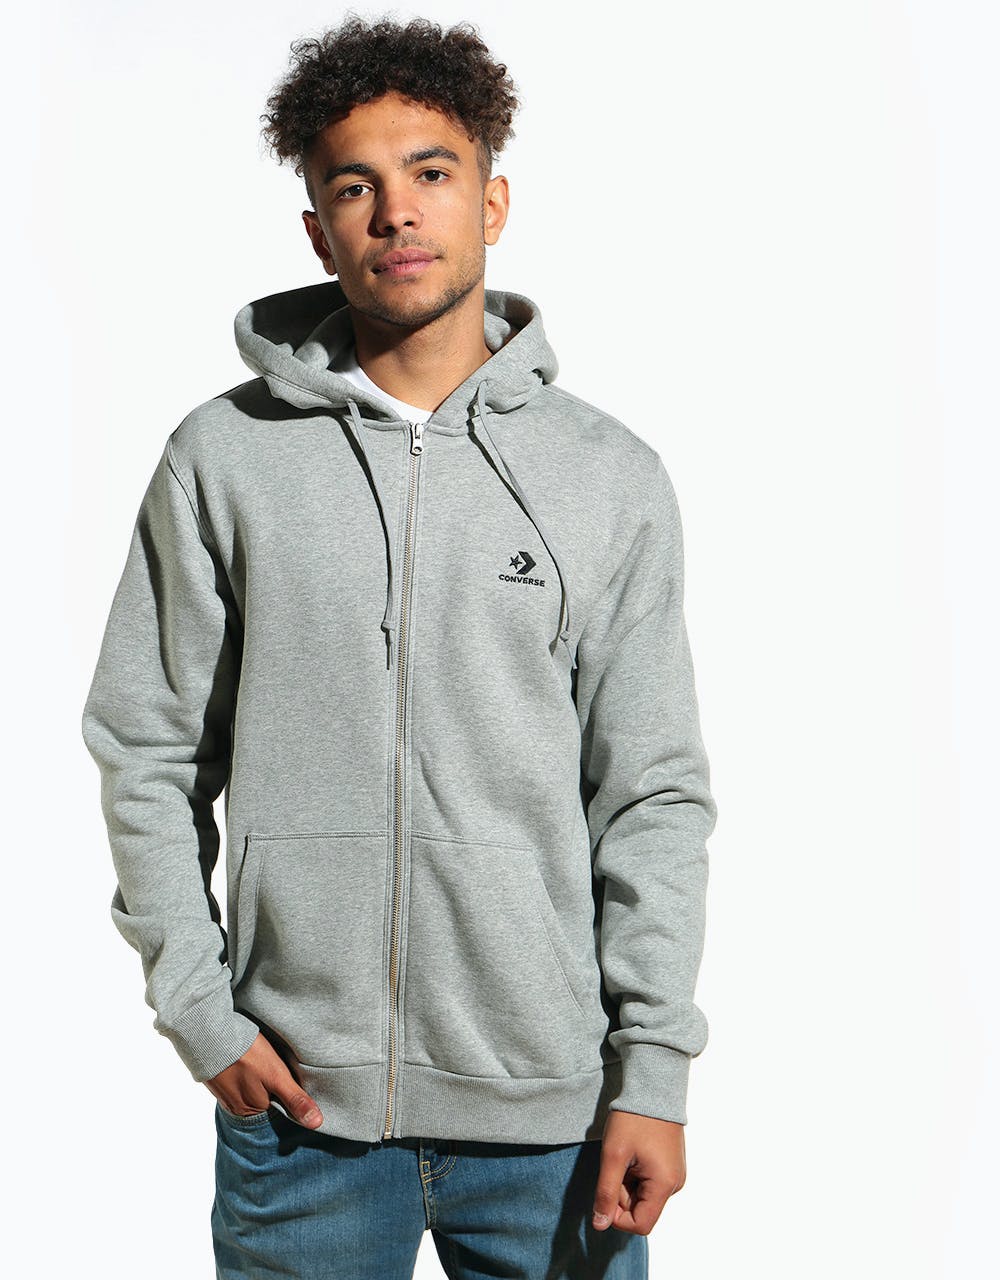 Hoodie FZ Star Vintage Grey Heather - Converse One Embroidered Route Chevron –